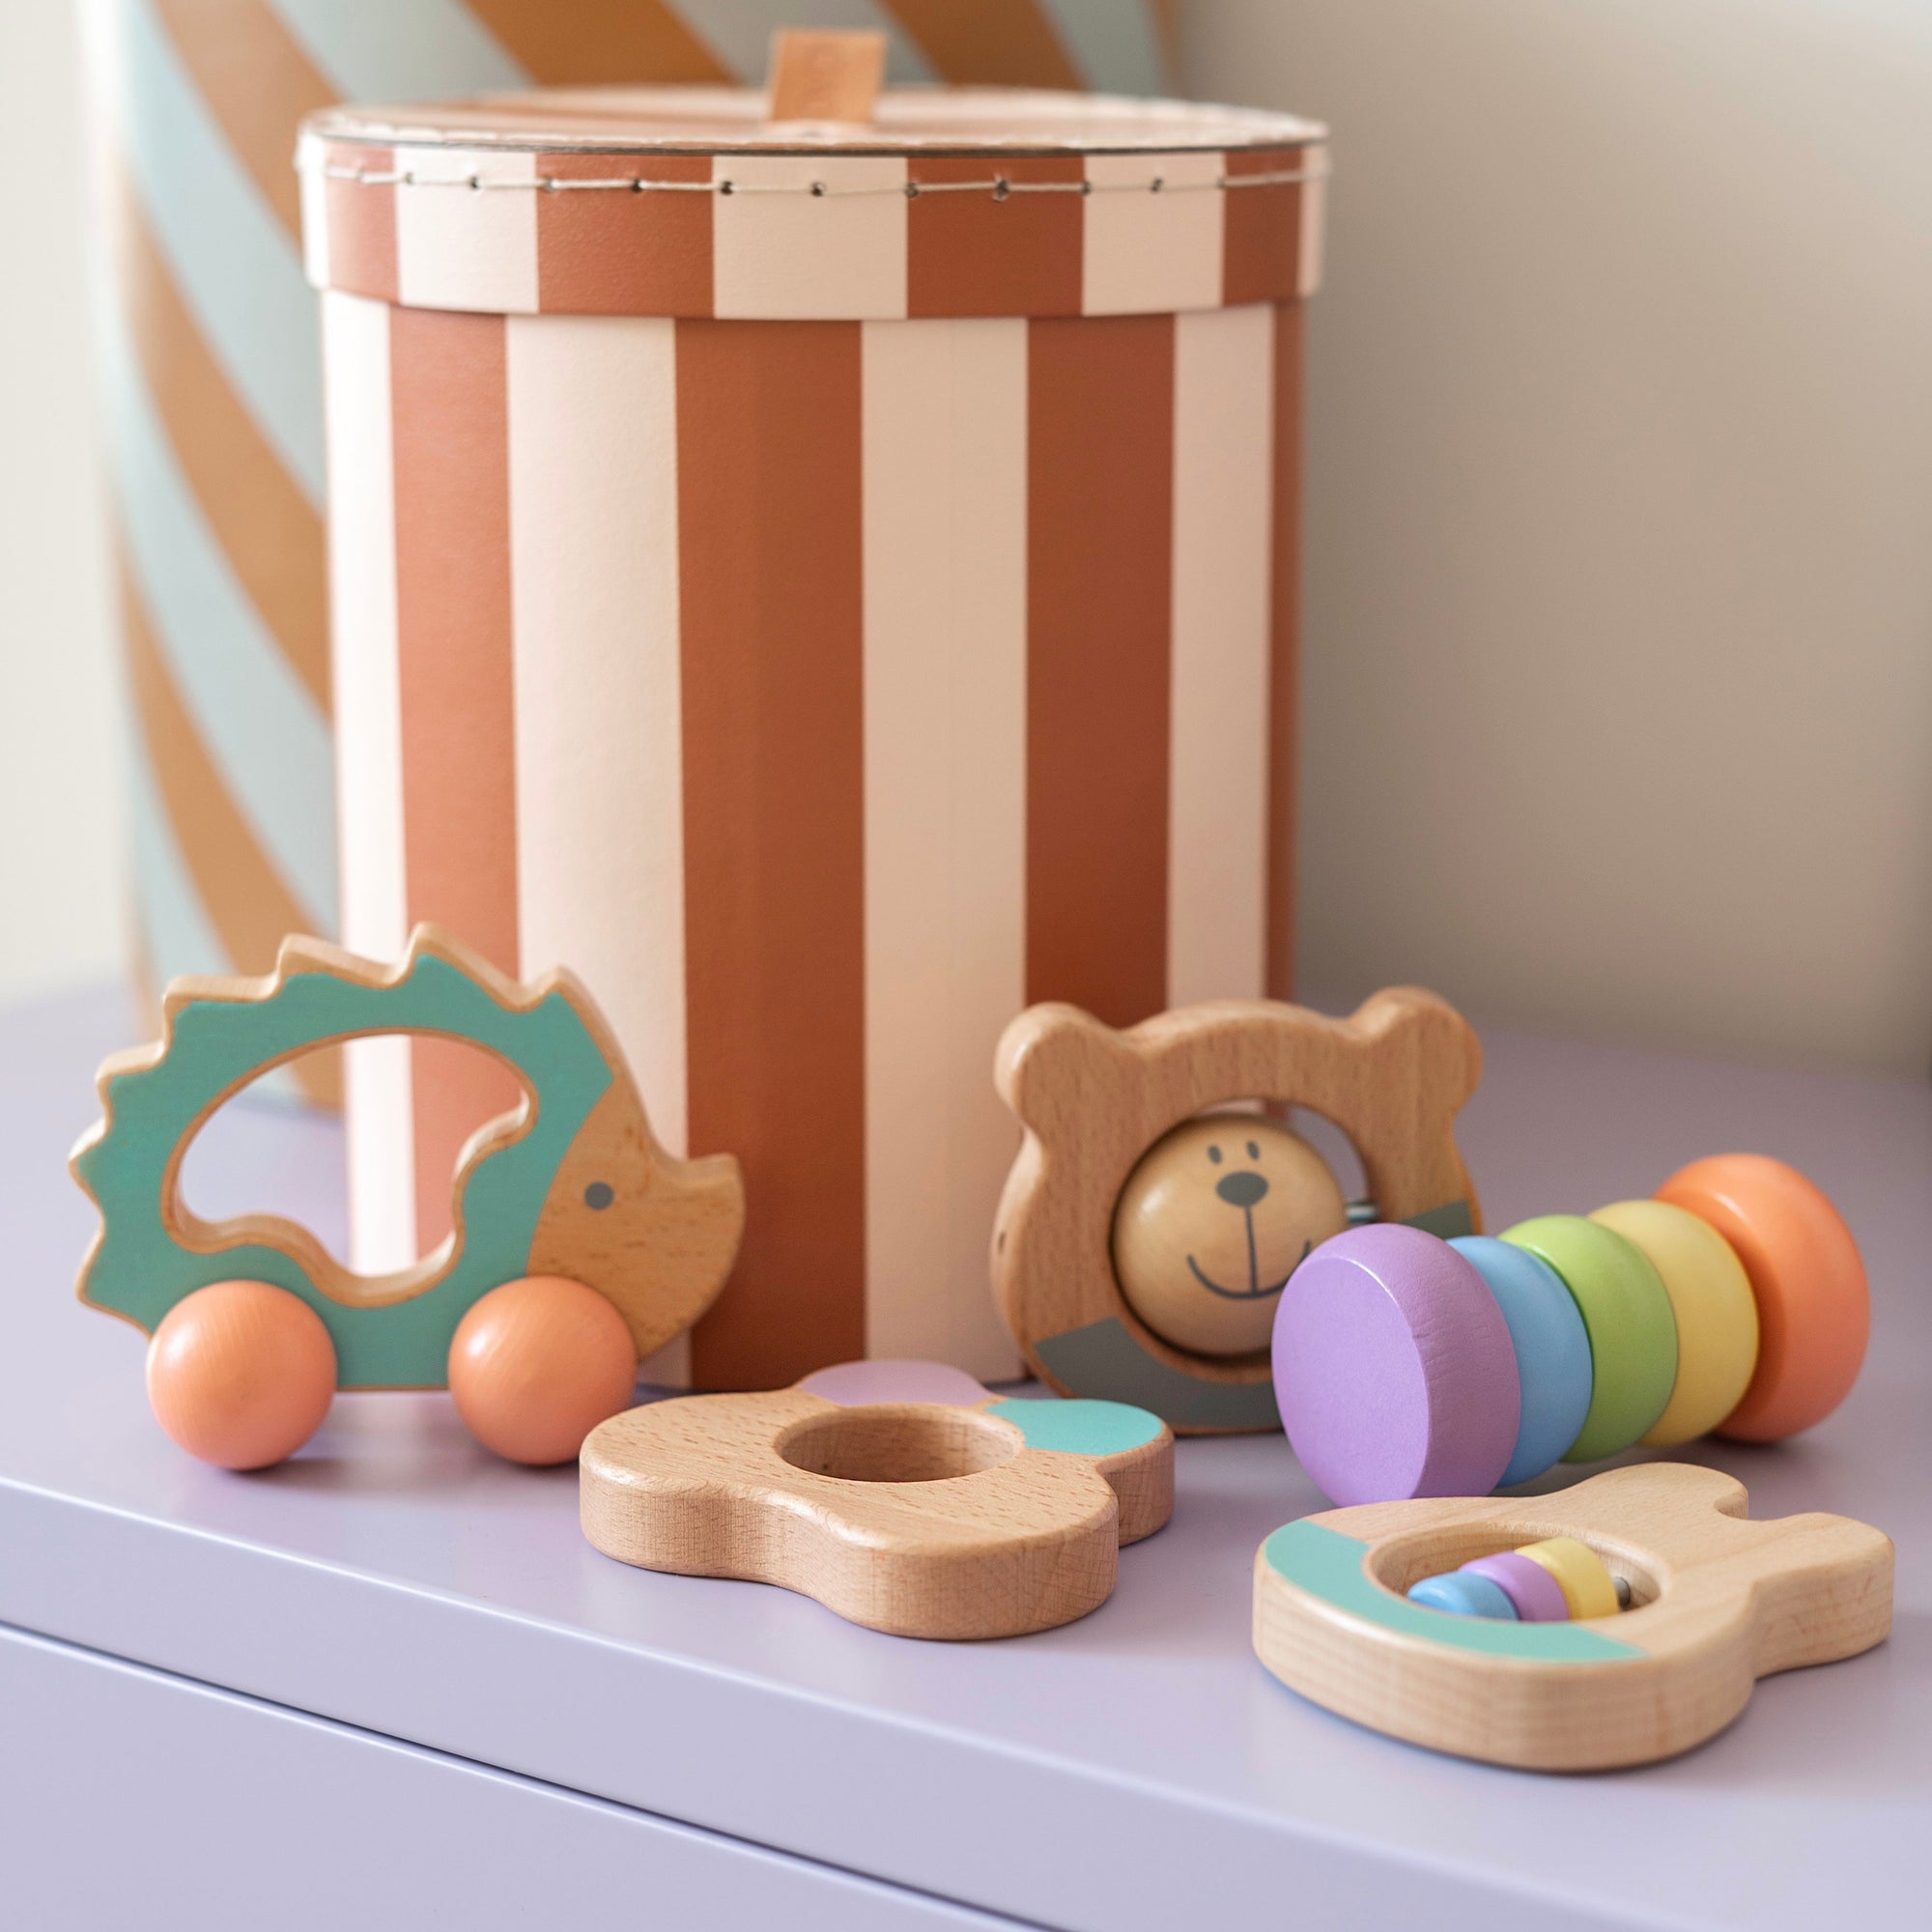 Image shows colourful wooden rattle set.